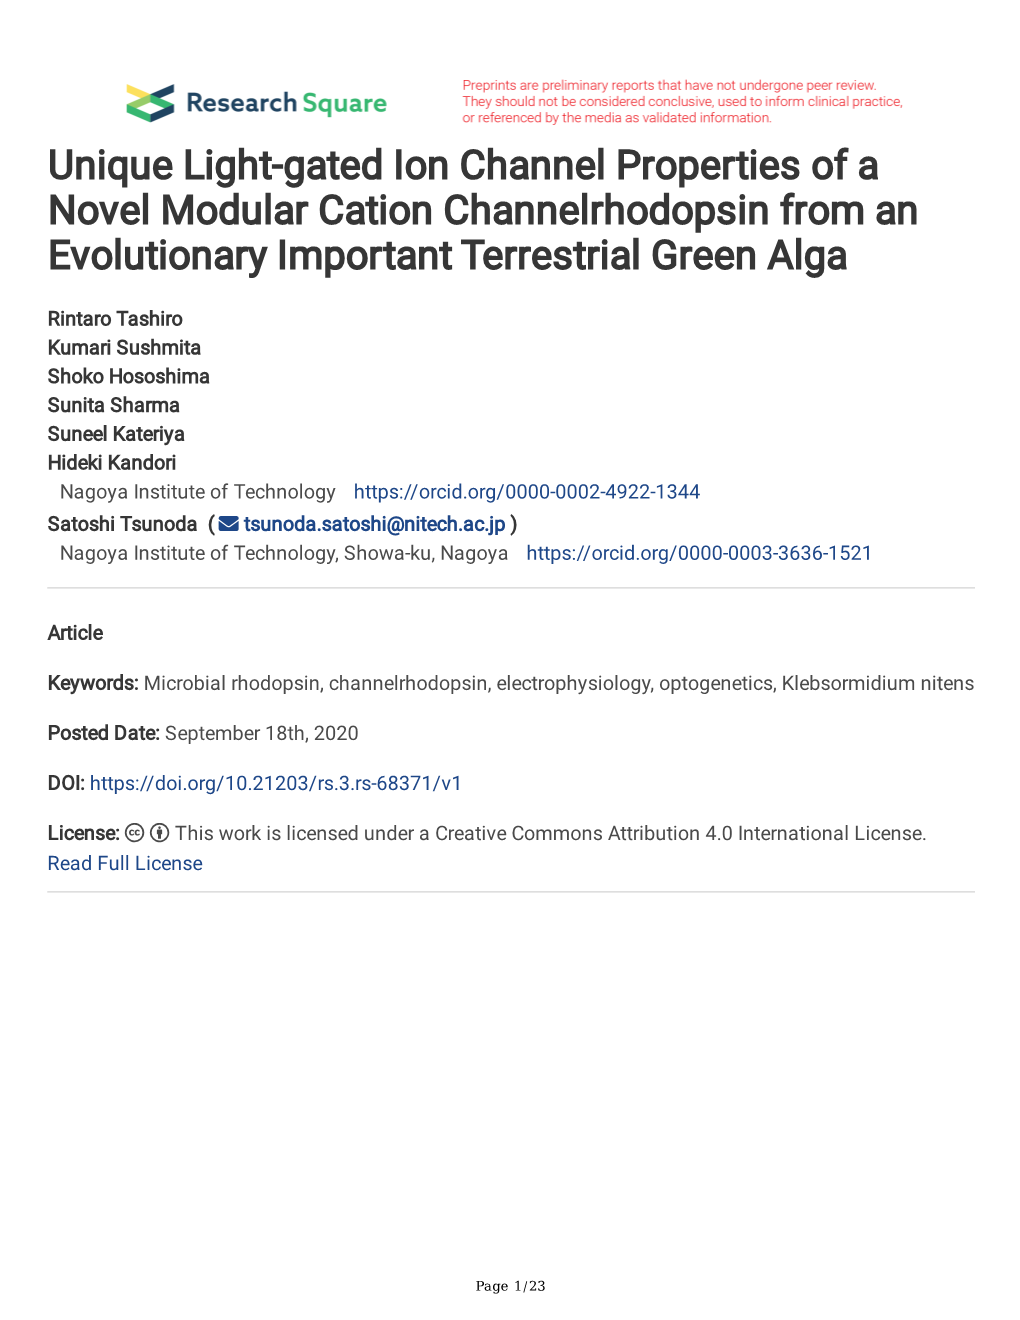 Unique Light-Gated Ion Channel Properties of a Novel Modular Cation Channelrhodopsin from an Evolutionary Important Terrestrial Green Alga